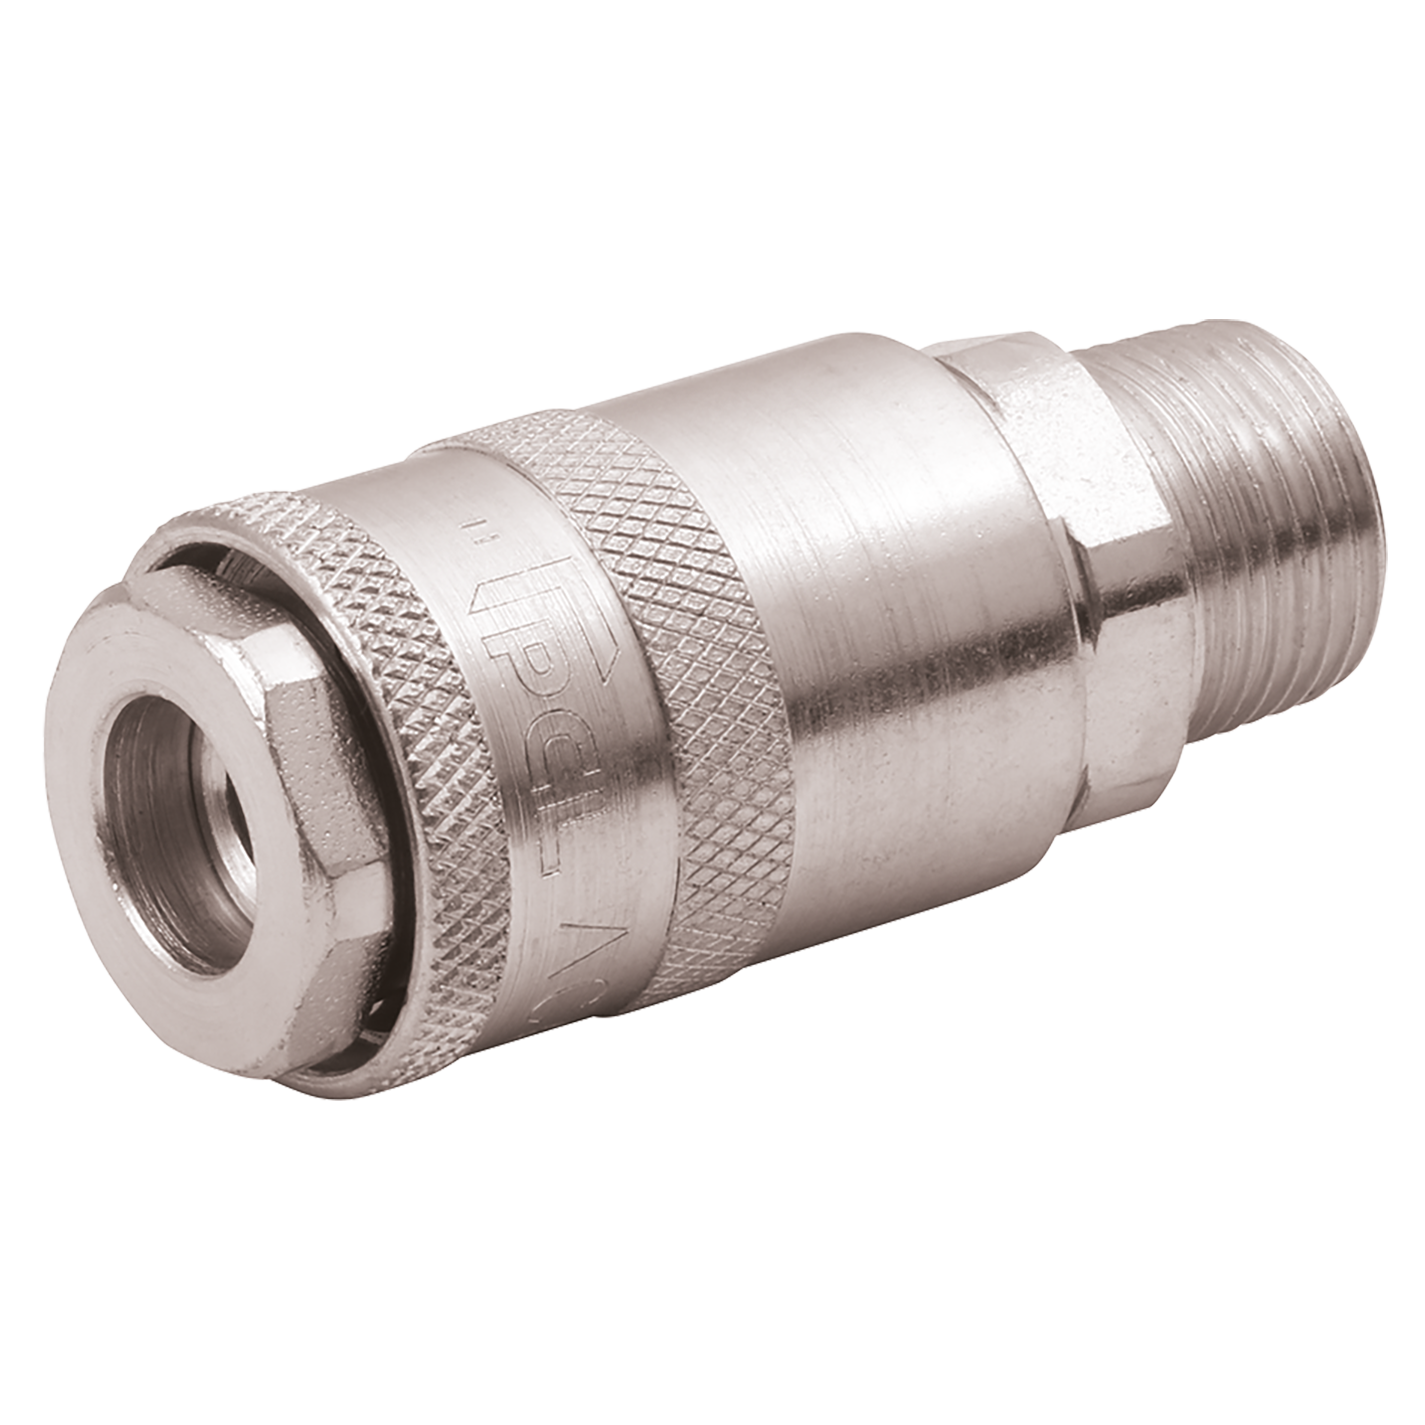 1/4" BSPT Male Euro Coupling